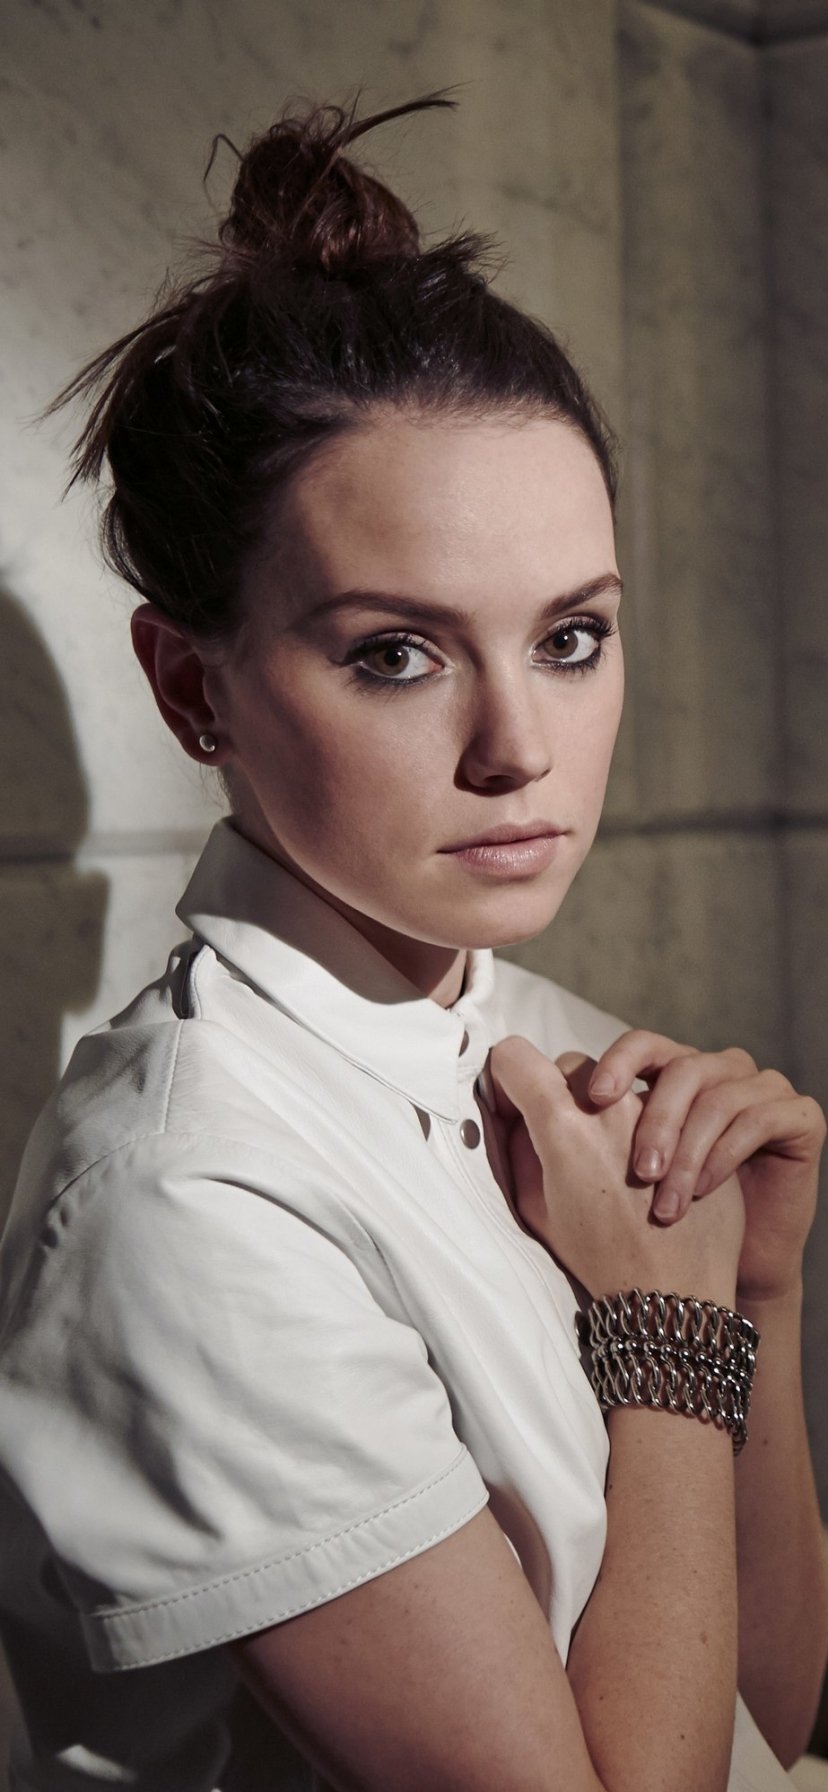 Daisy Ridley New 2021 Wallpapers